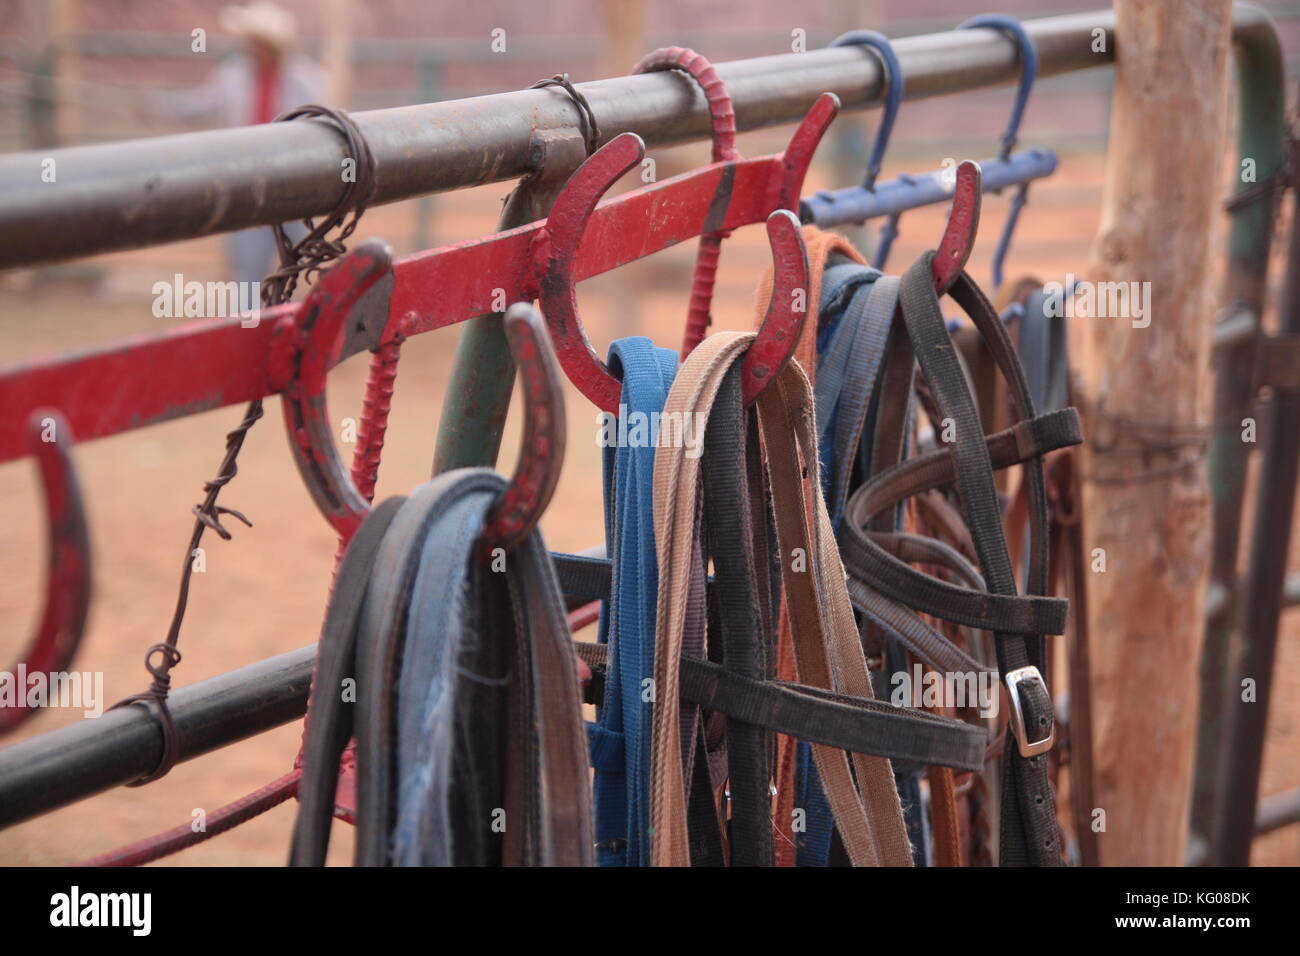 Bridles hanging from tack hooks on a metal horse fence. Close up detail. Monument Valley Navajo Tribal Park, Arizona. Stock Photo